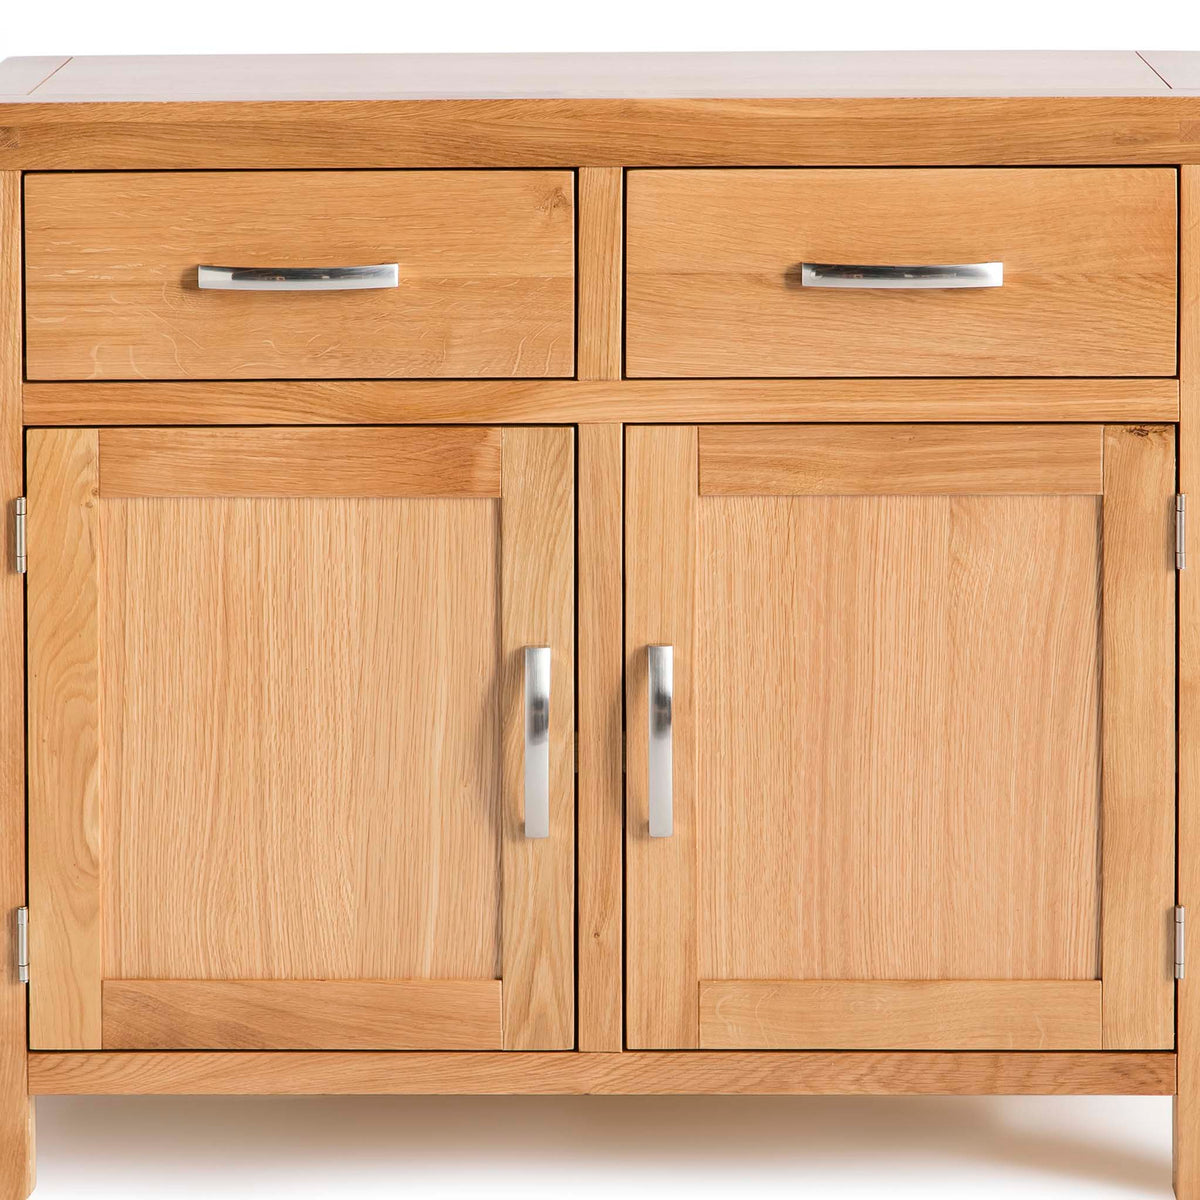  Abbey Light Oak Small Sideboard Cabinet  - Close up of front of sideboard